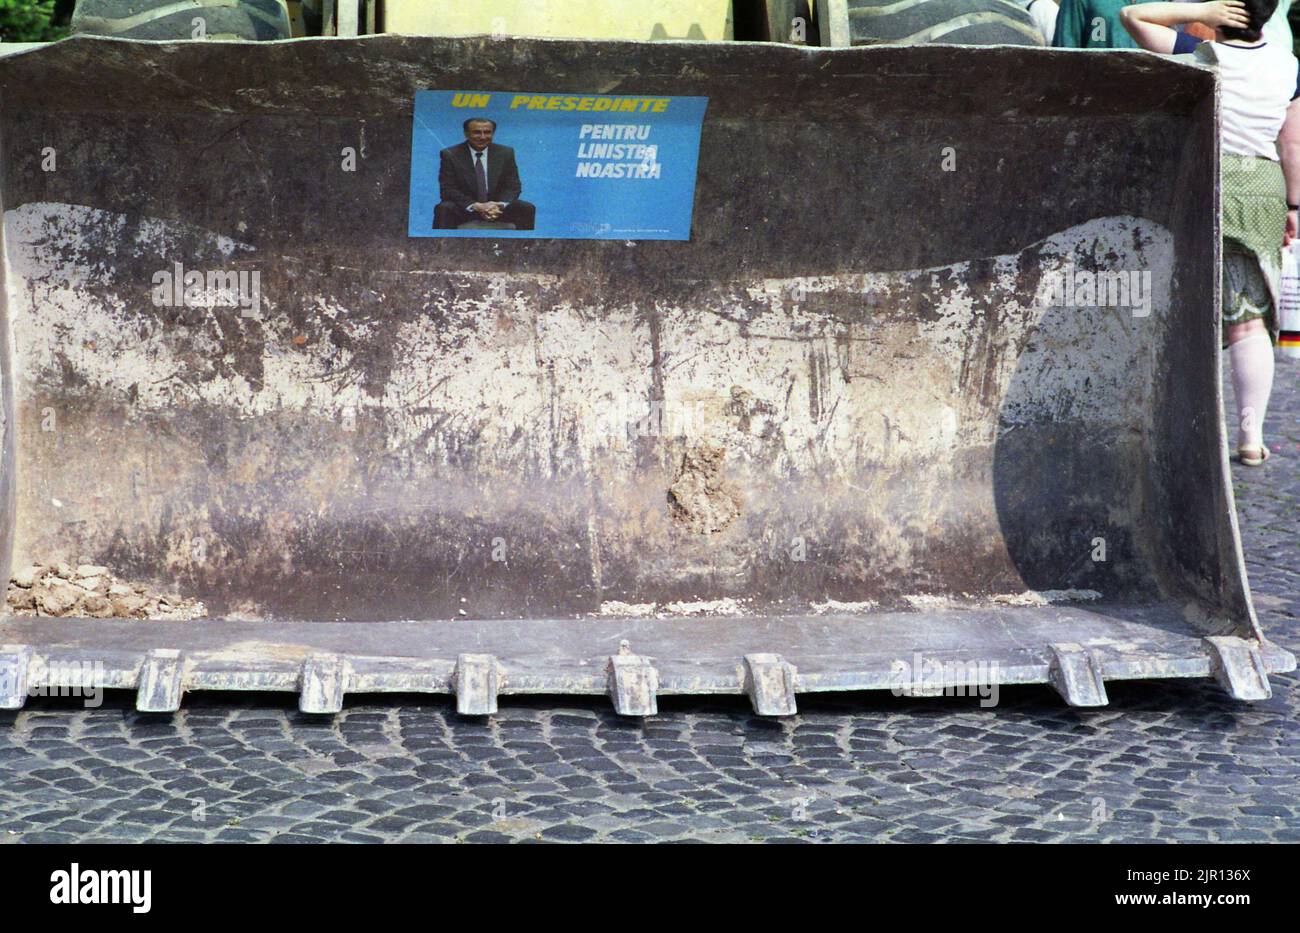 May, 1990. The first democratic elections after the fall of communism. Political poster of candidate (later president) Ion Iliescu placed in a bulldozer's blade. Stock Photo